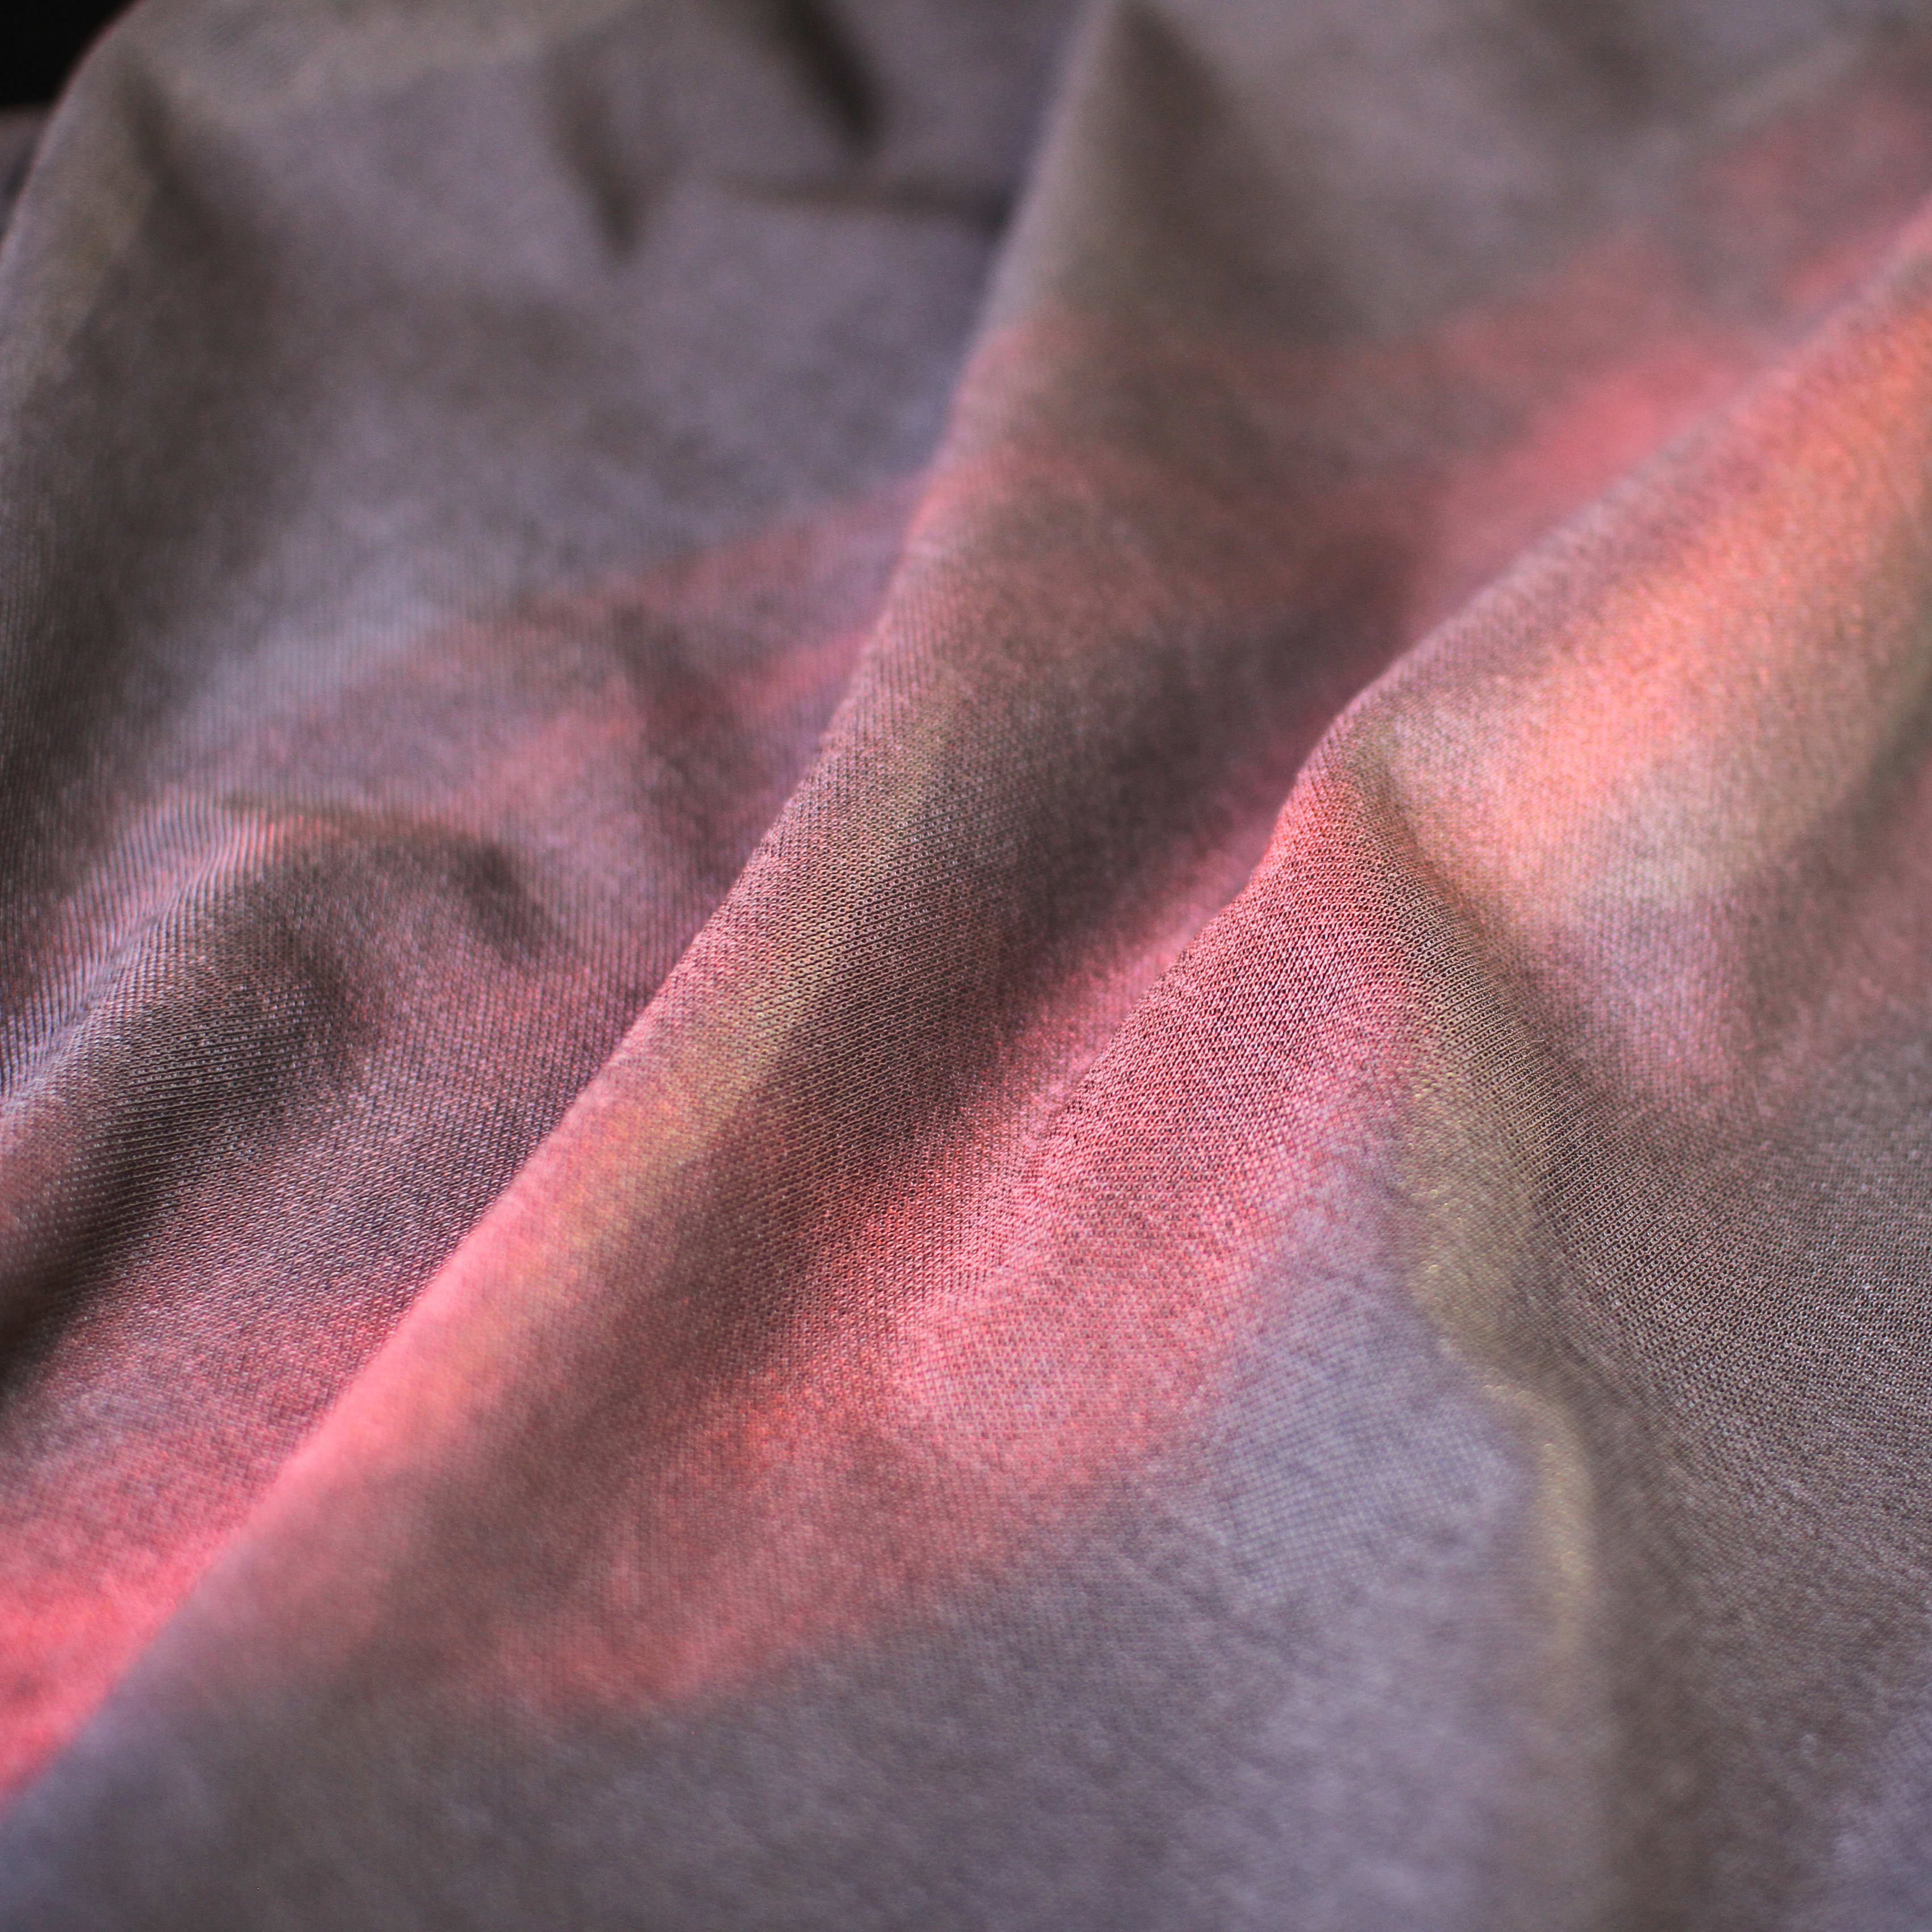 Close up of the fabric with a red light to illustrate the antibacterial property.